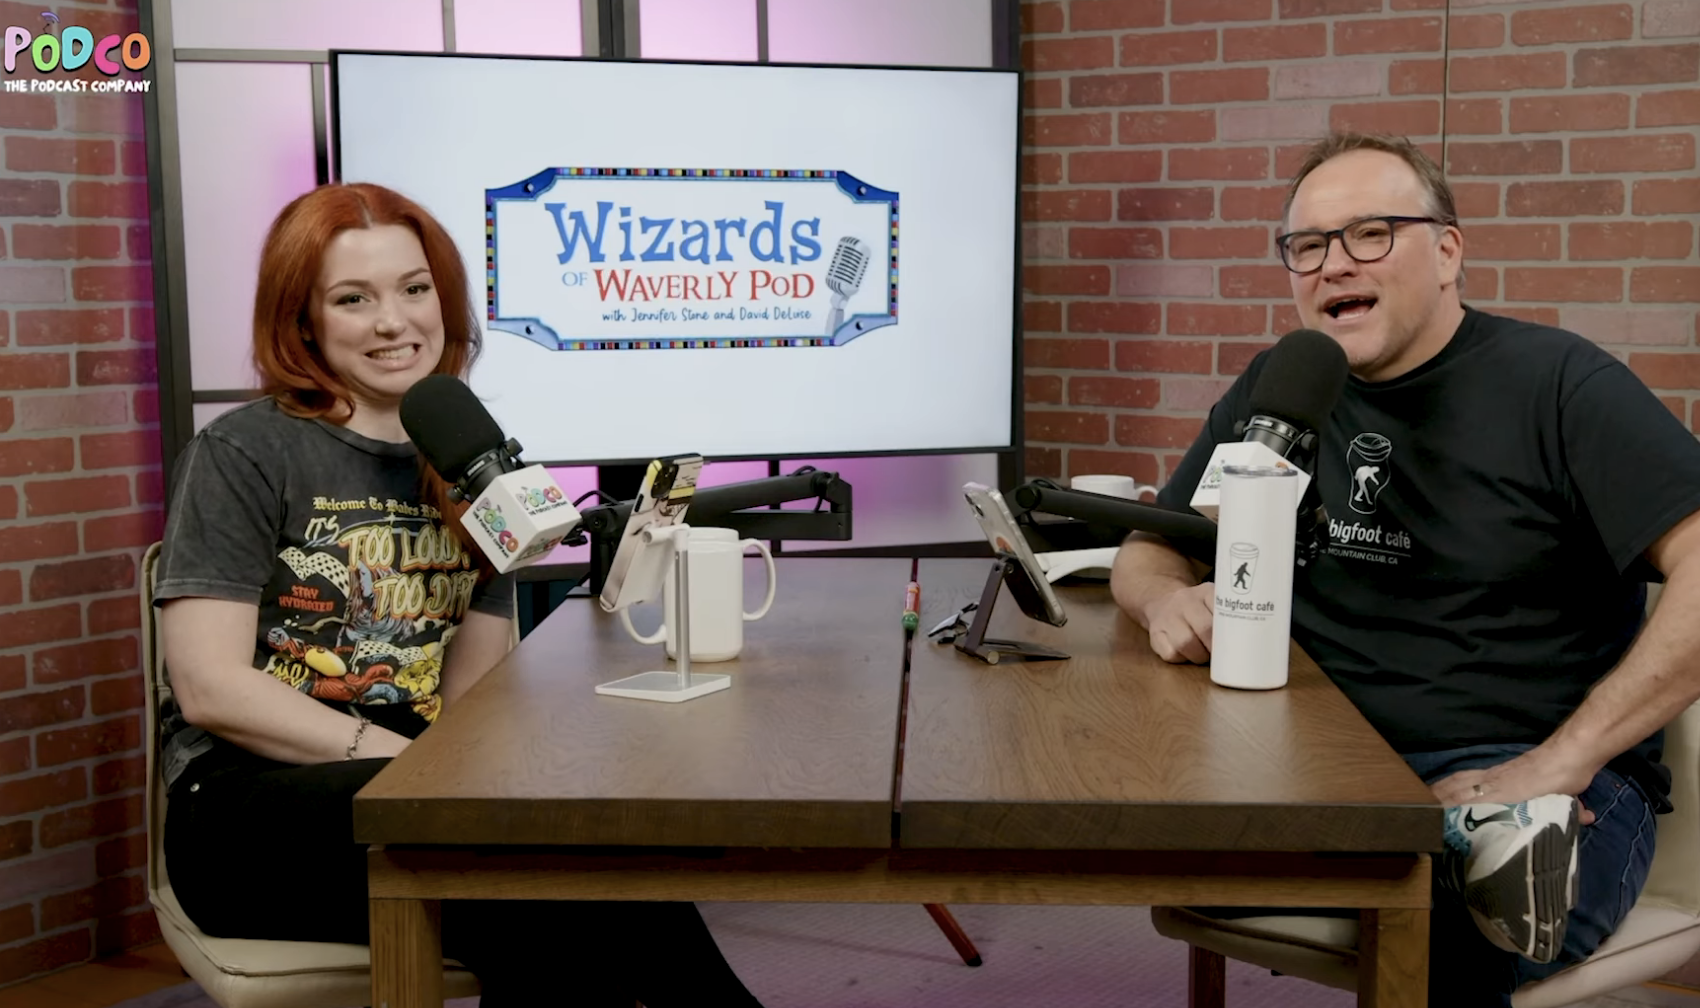 Jennifer Stone and David DeLuise reacting during the podcast interview